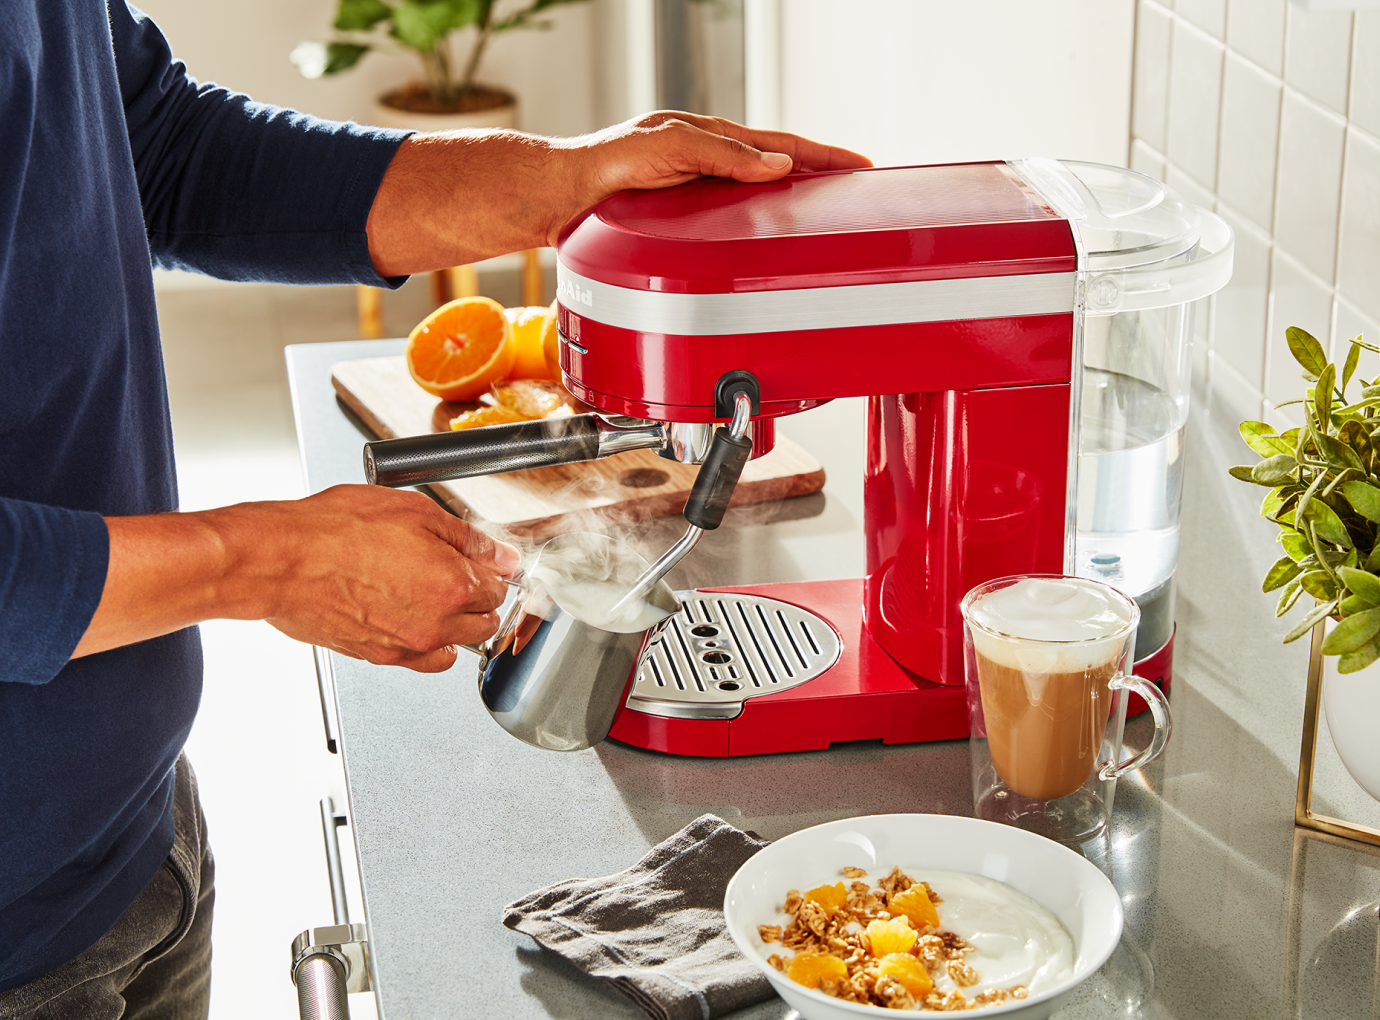 A countertop appliance from KitchenAid.